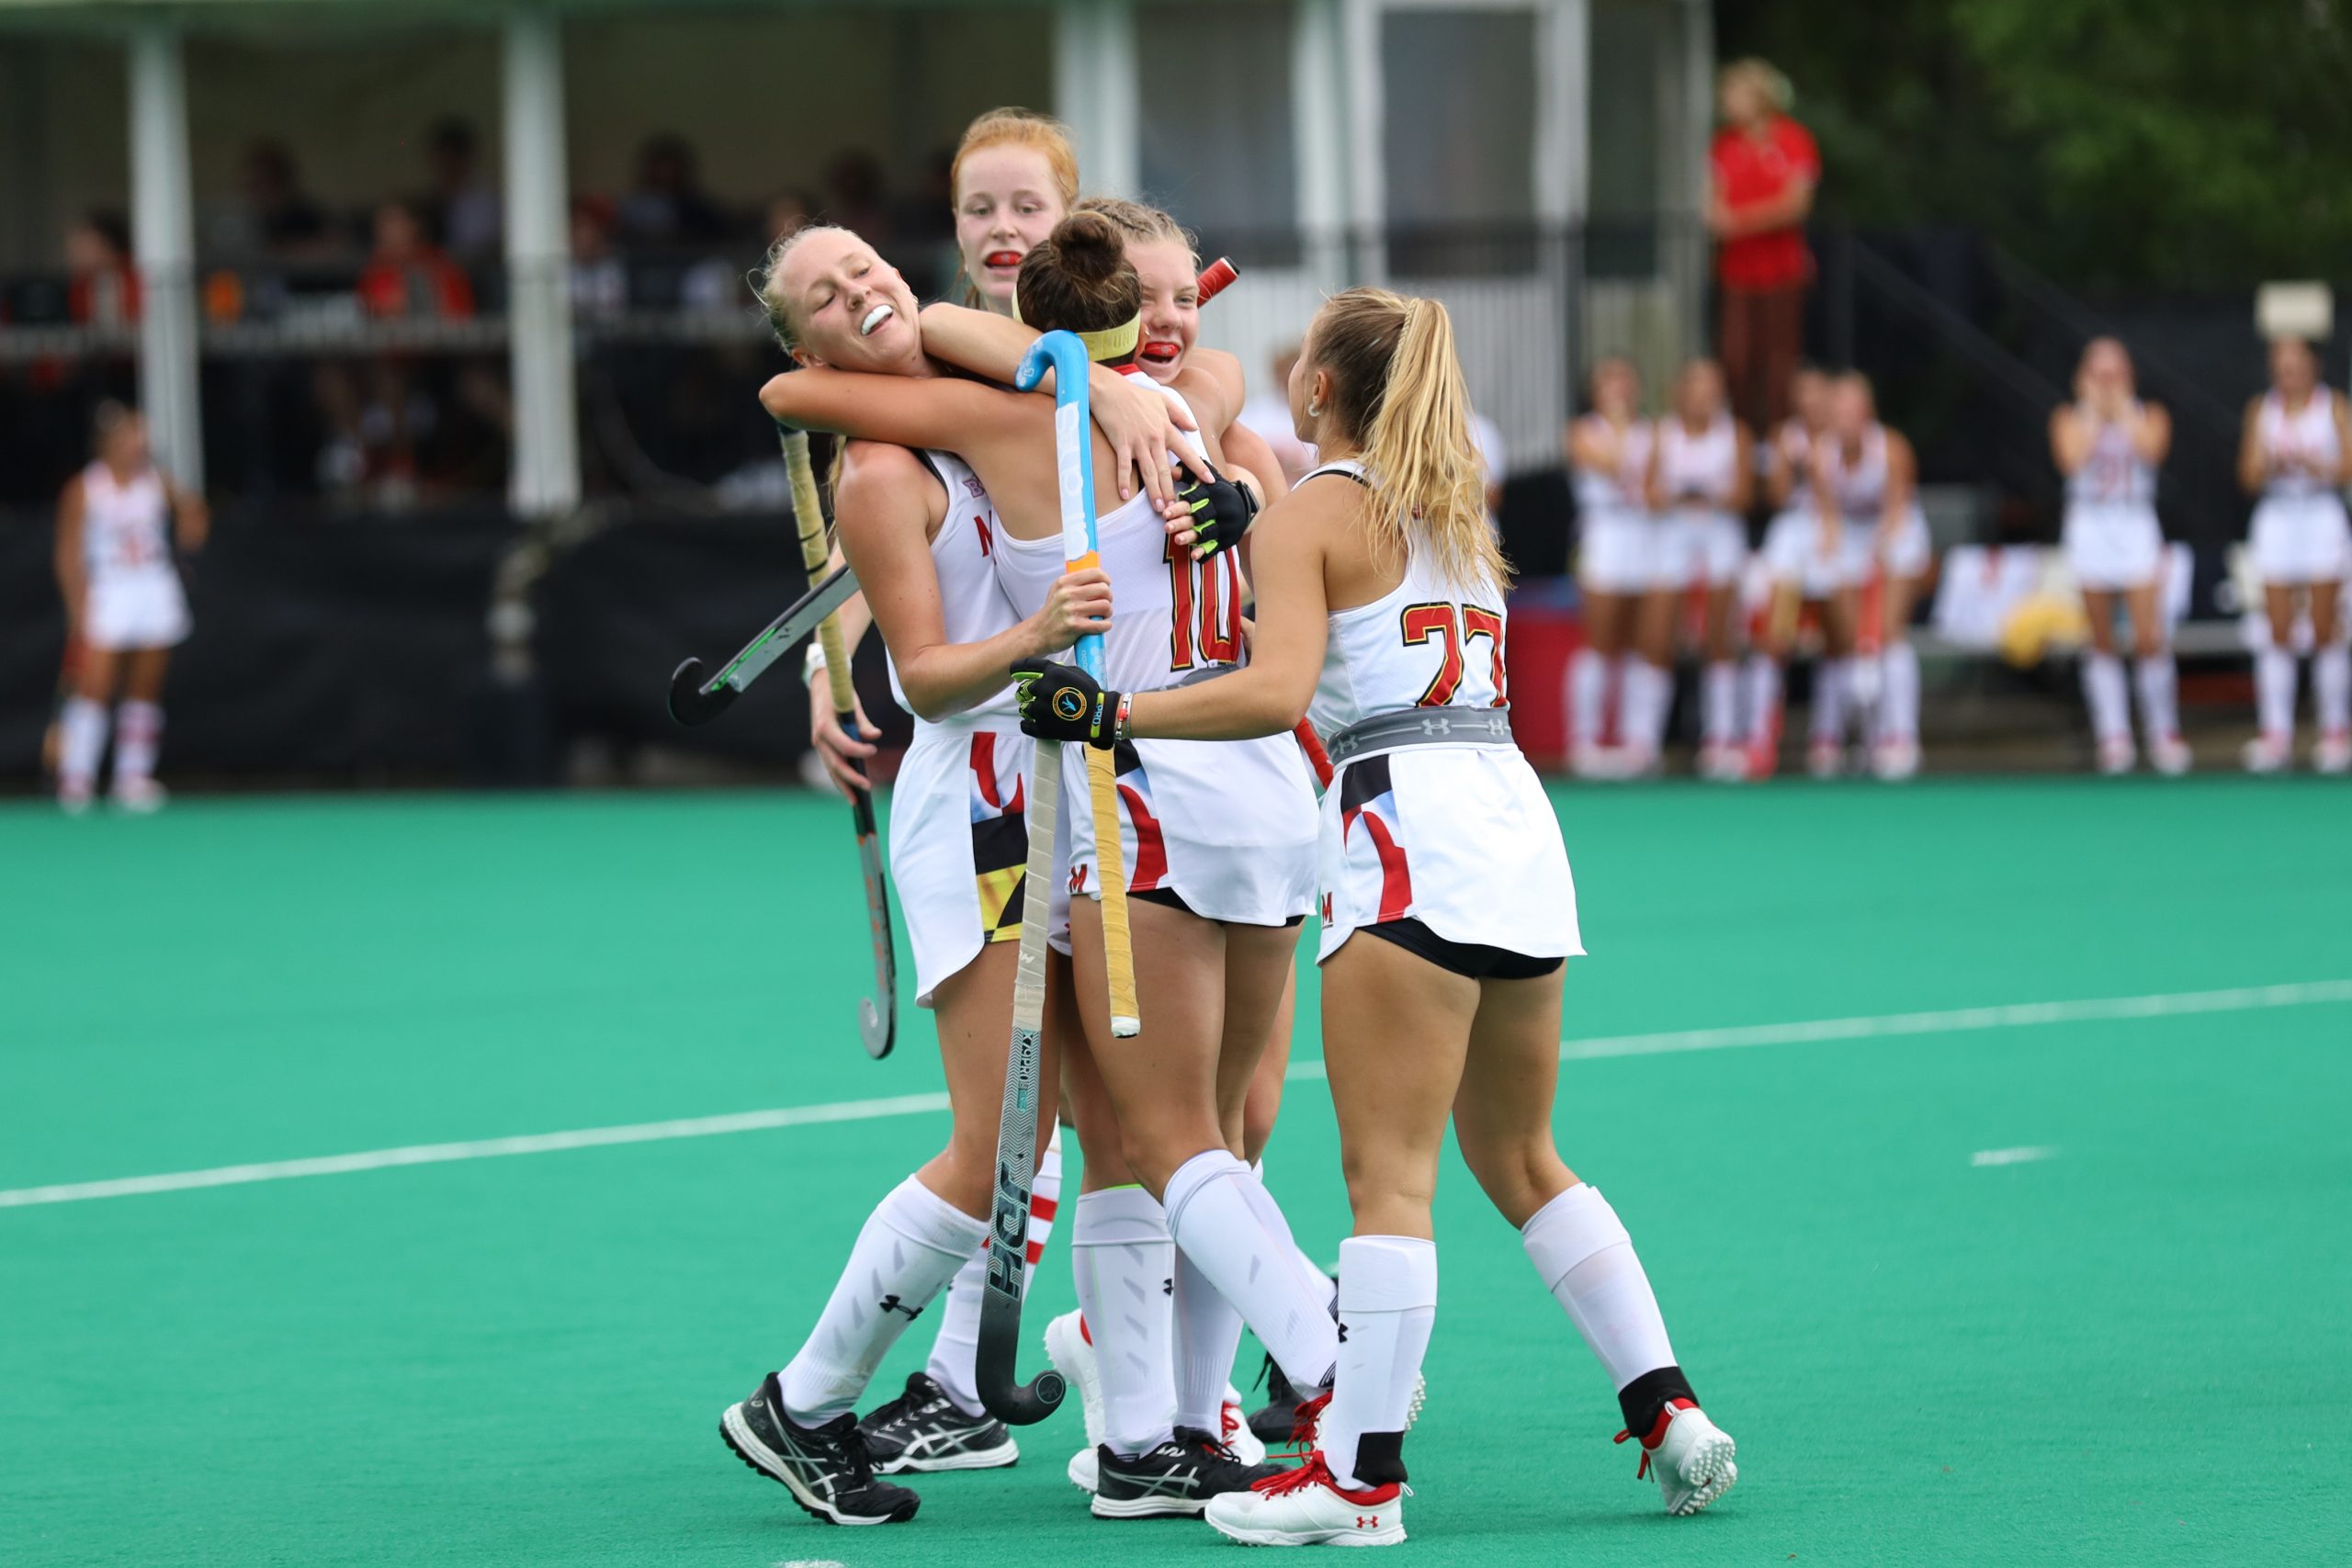 MM 11.28: Maryland field hockey's Hope Rose named to 2022 Pan